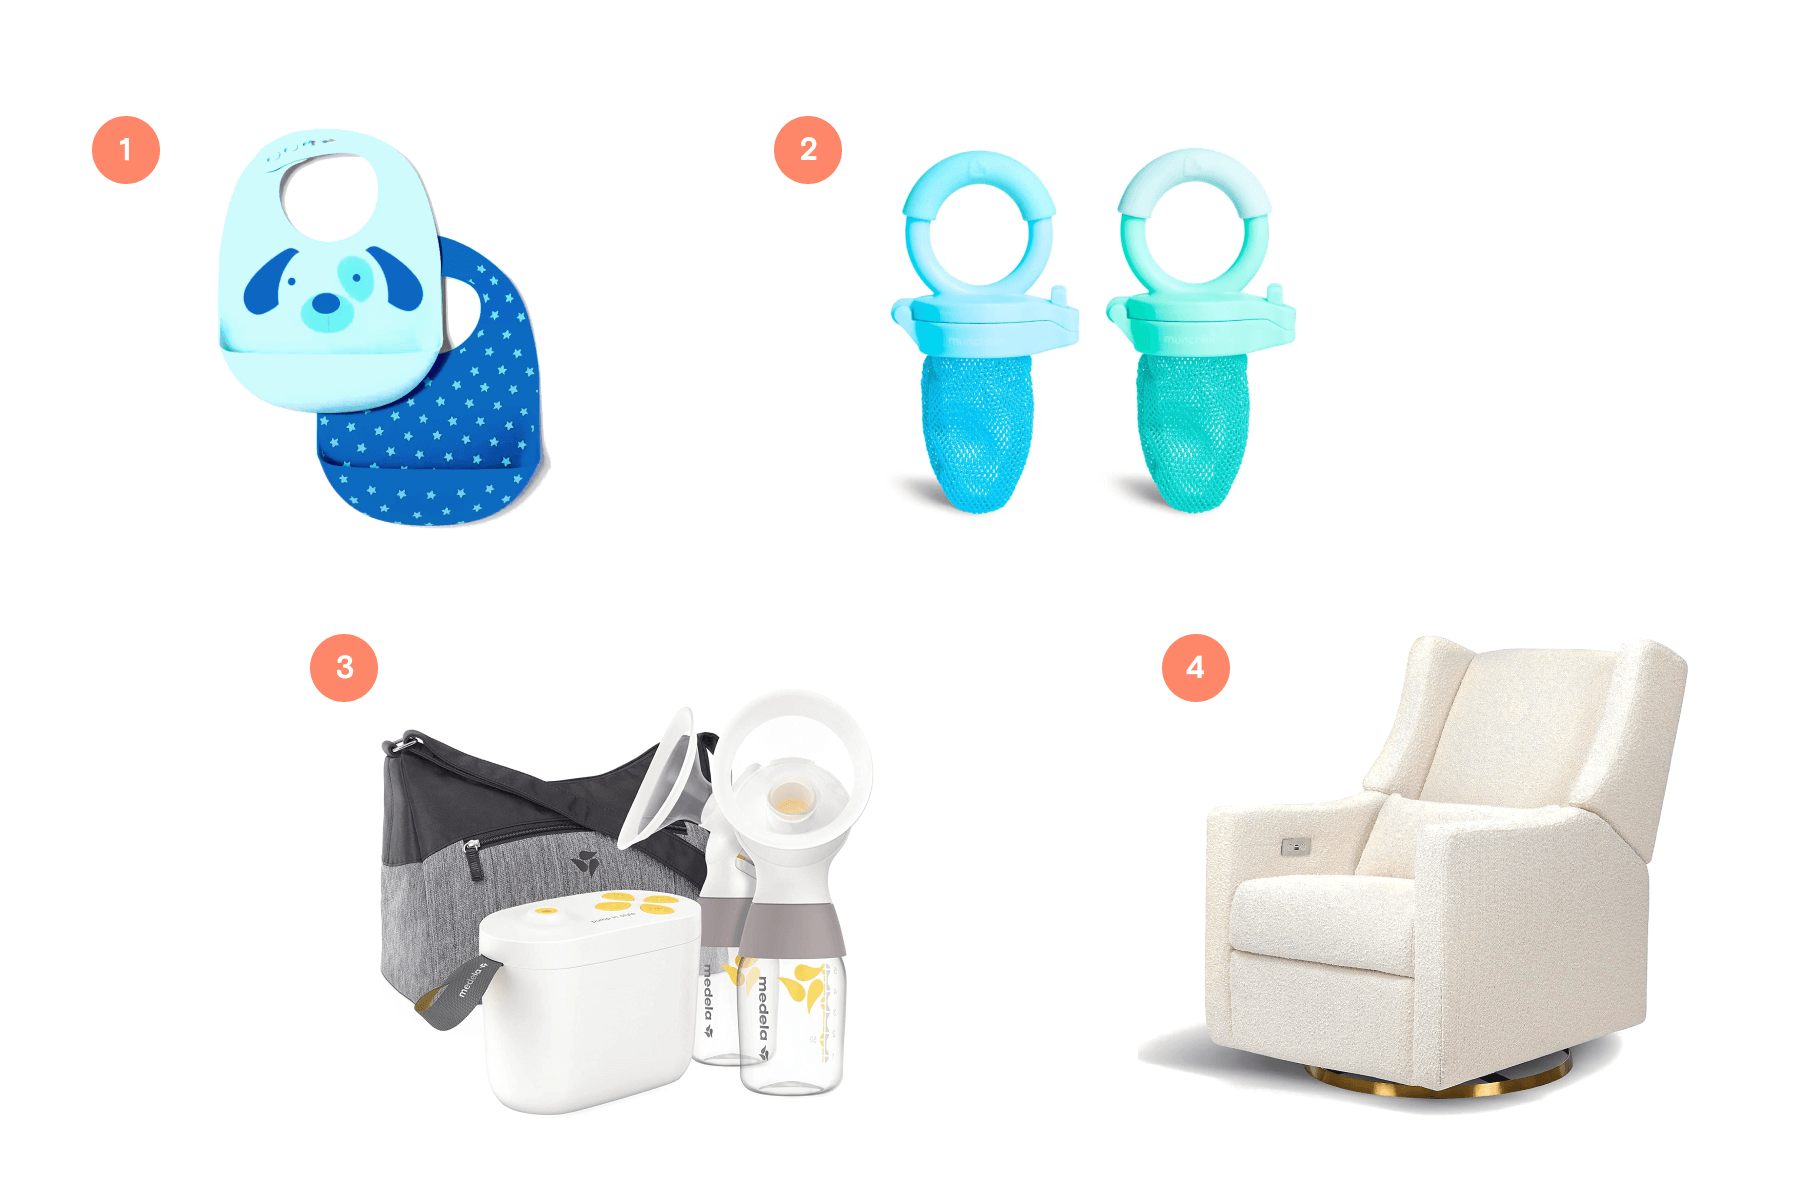 Four numbered baby items: Blue bibs, two food feeders, a breast pump kit, and a white recliner chair.